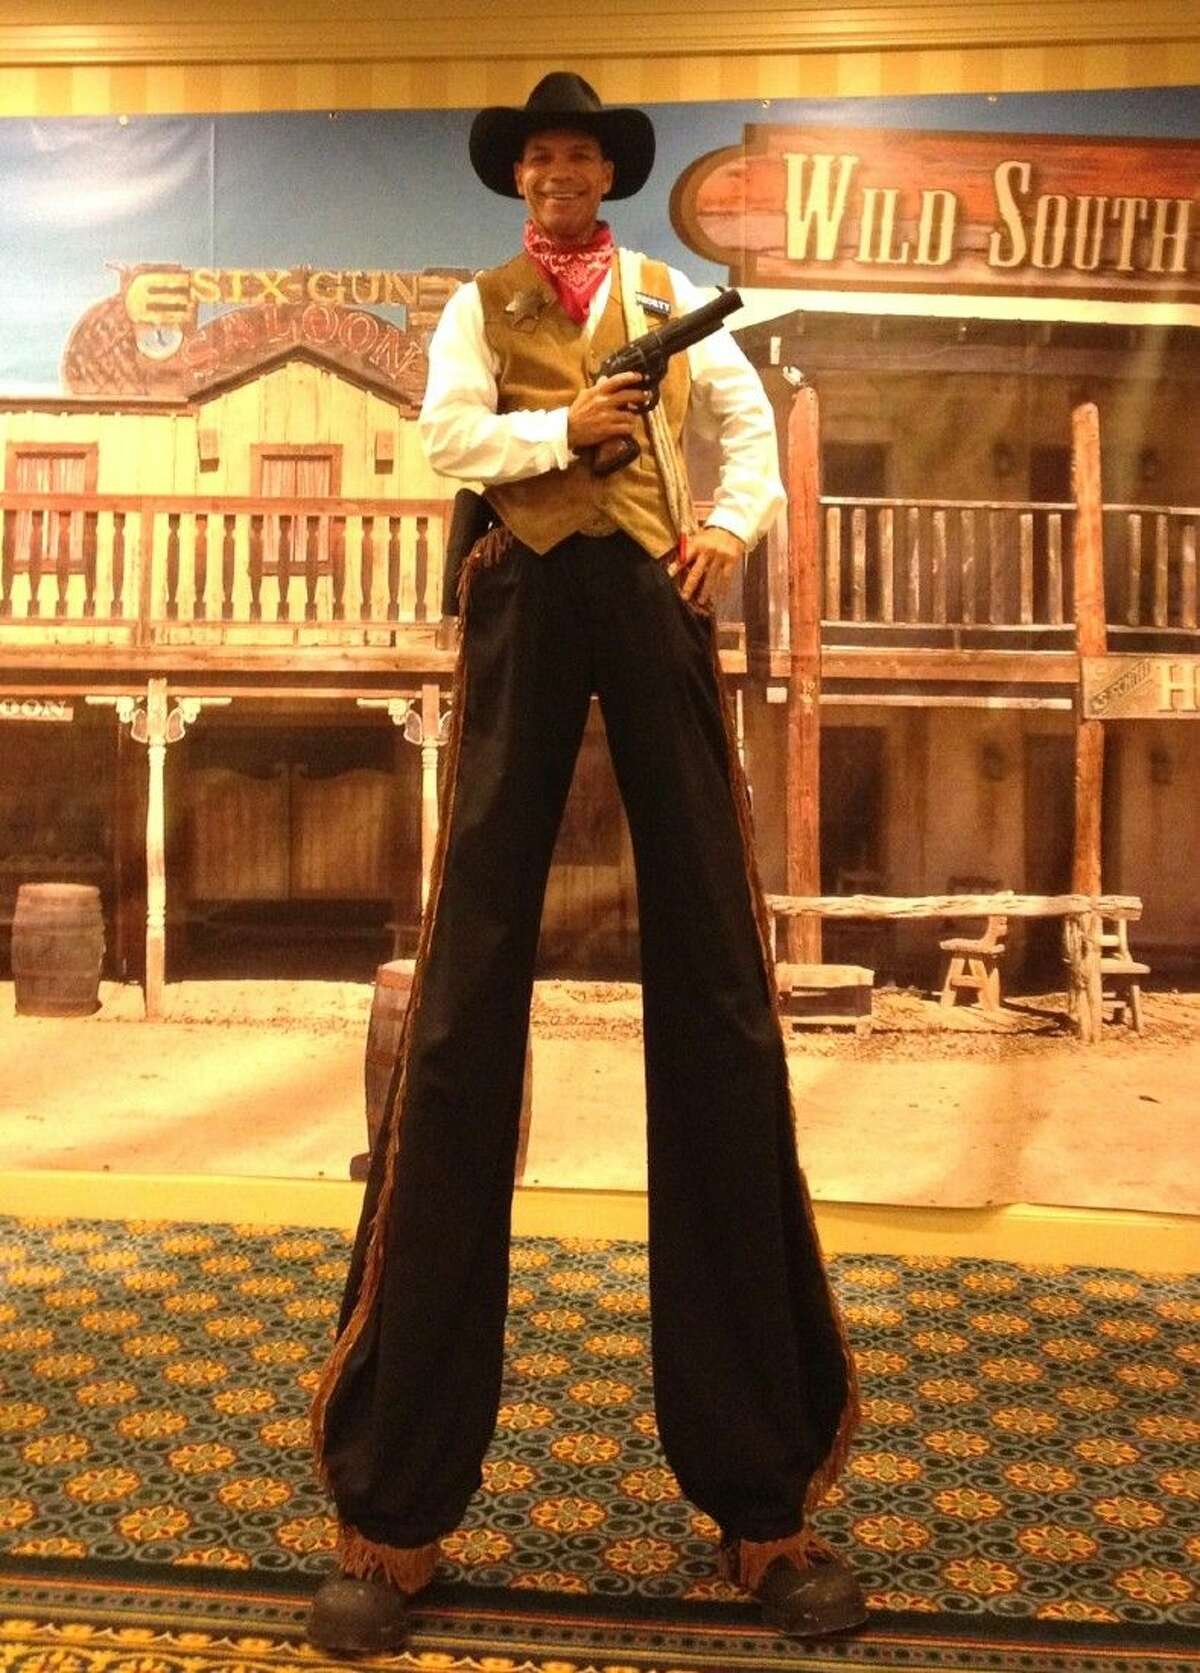 The larger-than-life Tall Texan cowboy will entertain guests with rope tricks and his ability to balance on stilts from 11 a.m. to noon on Go Texan Day at The Woodlands Children’s Museum.